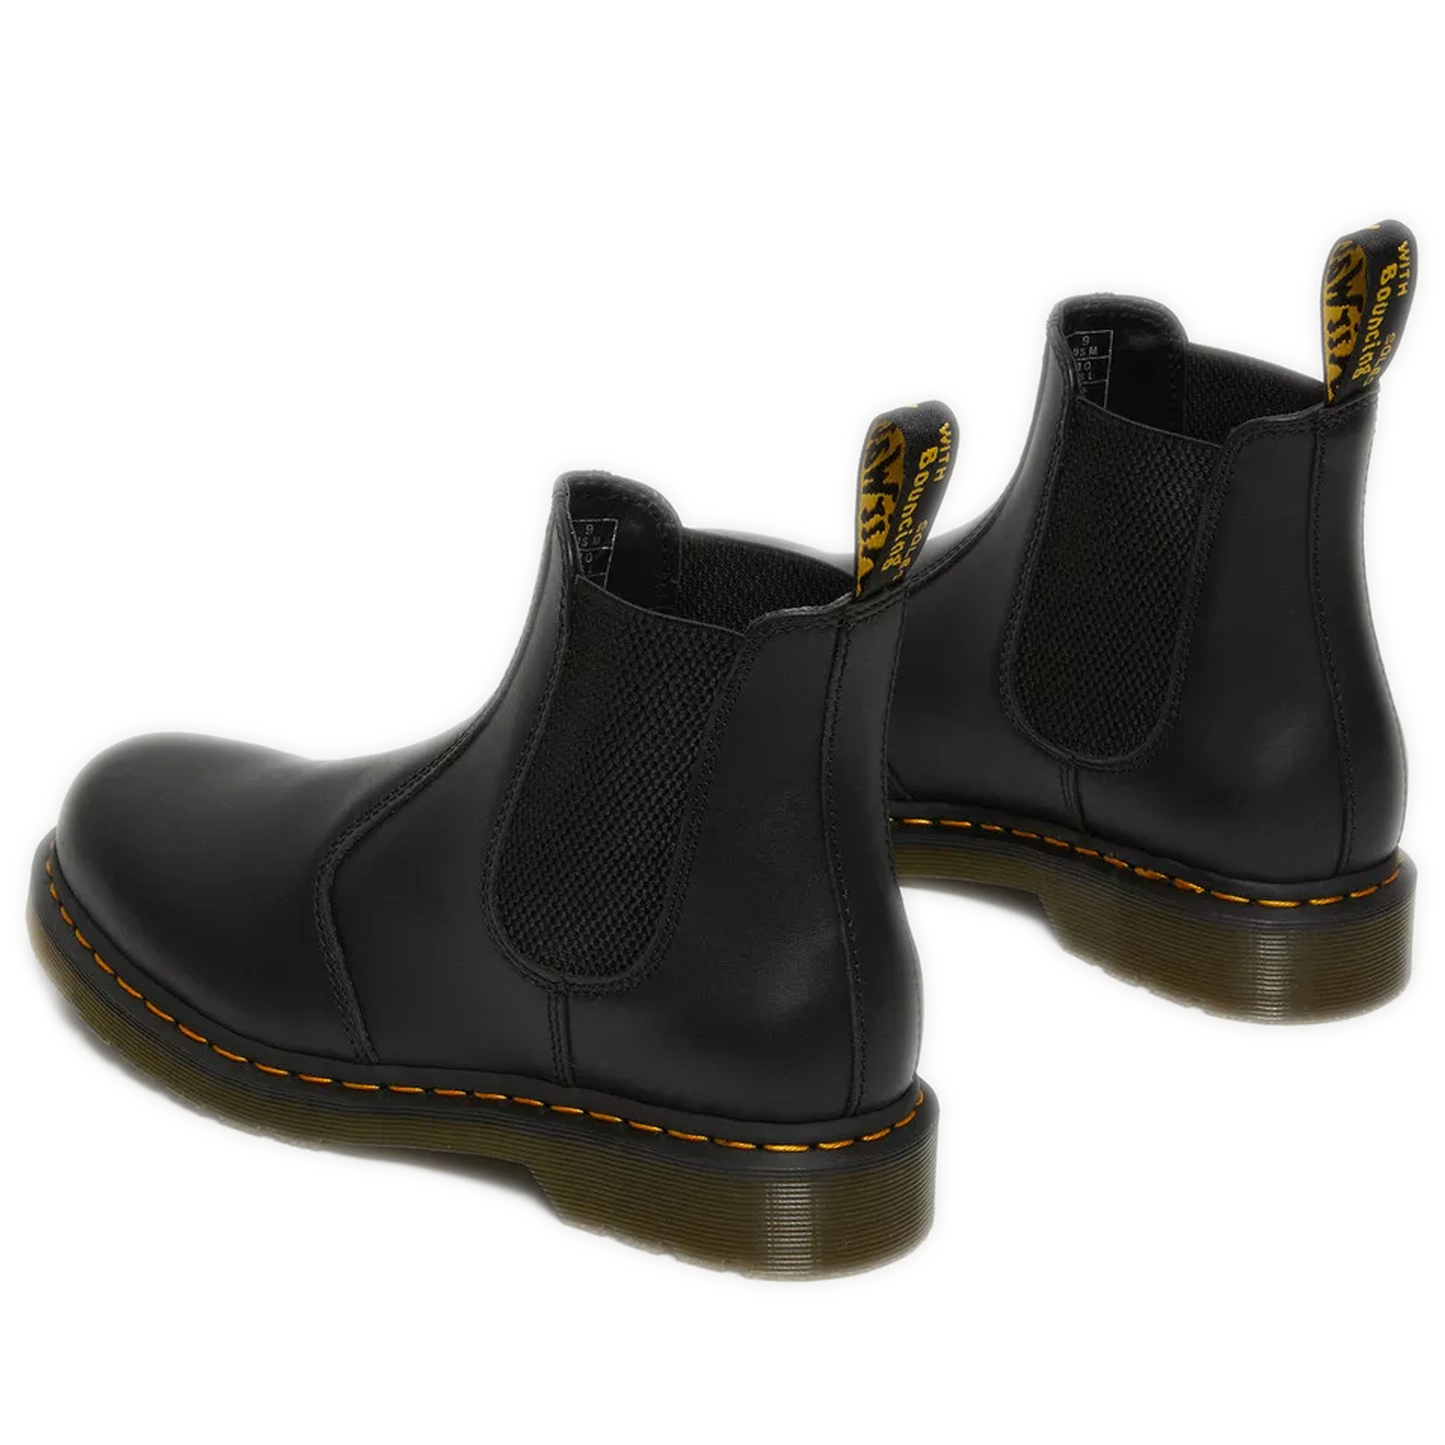 Women's Dr. Martens 2976 Nappa Leather Chelsea Boots - Black Nappa